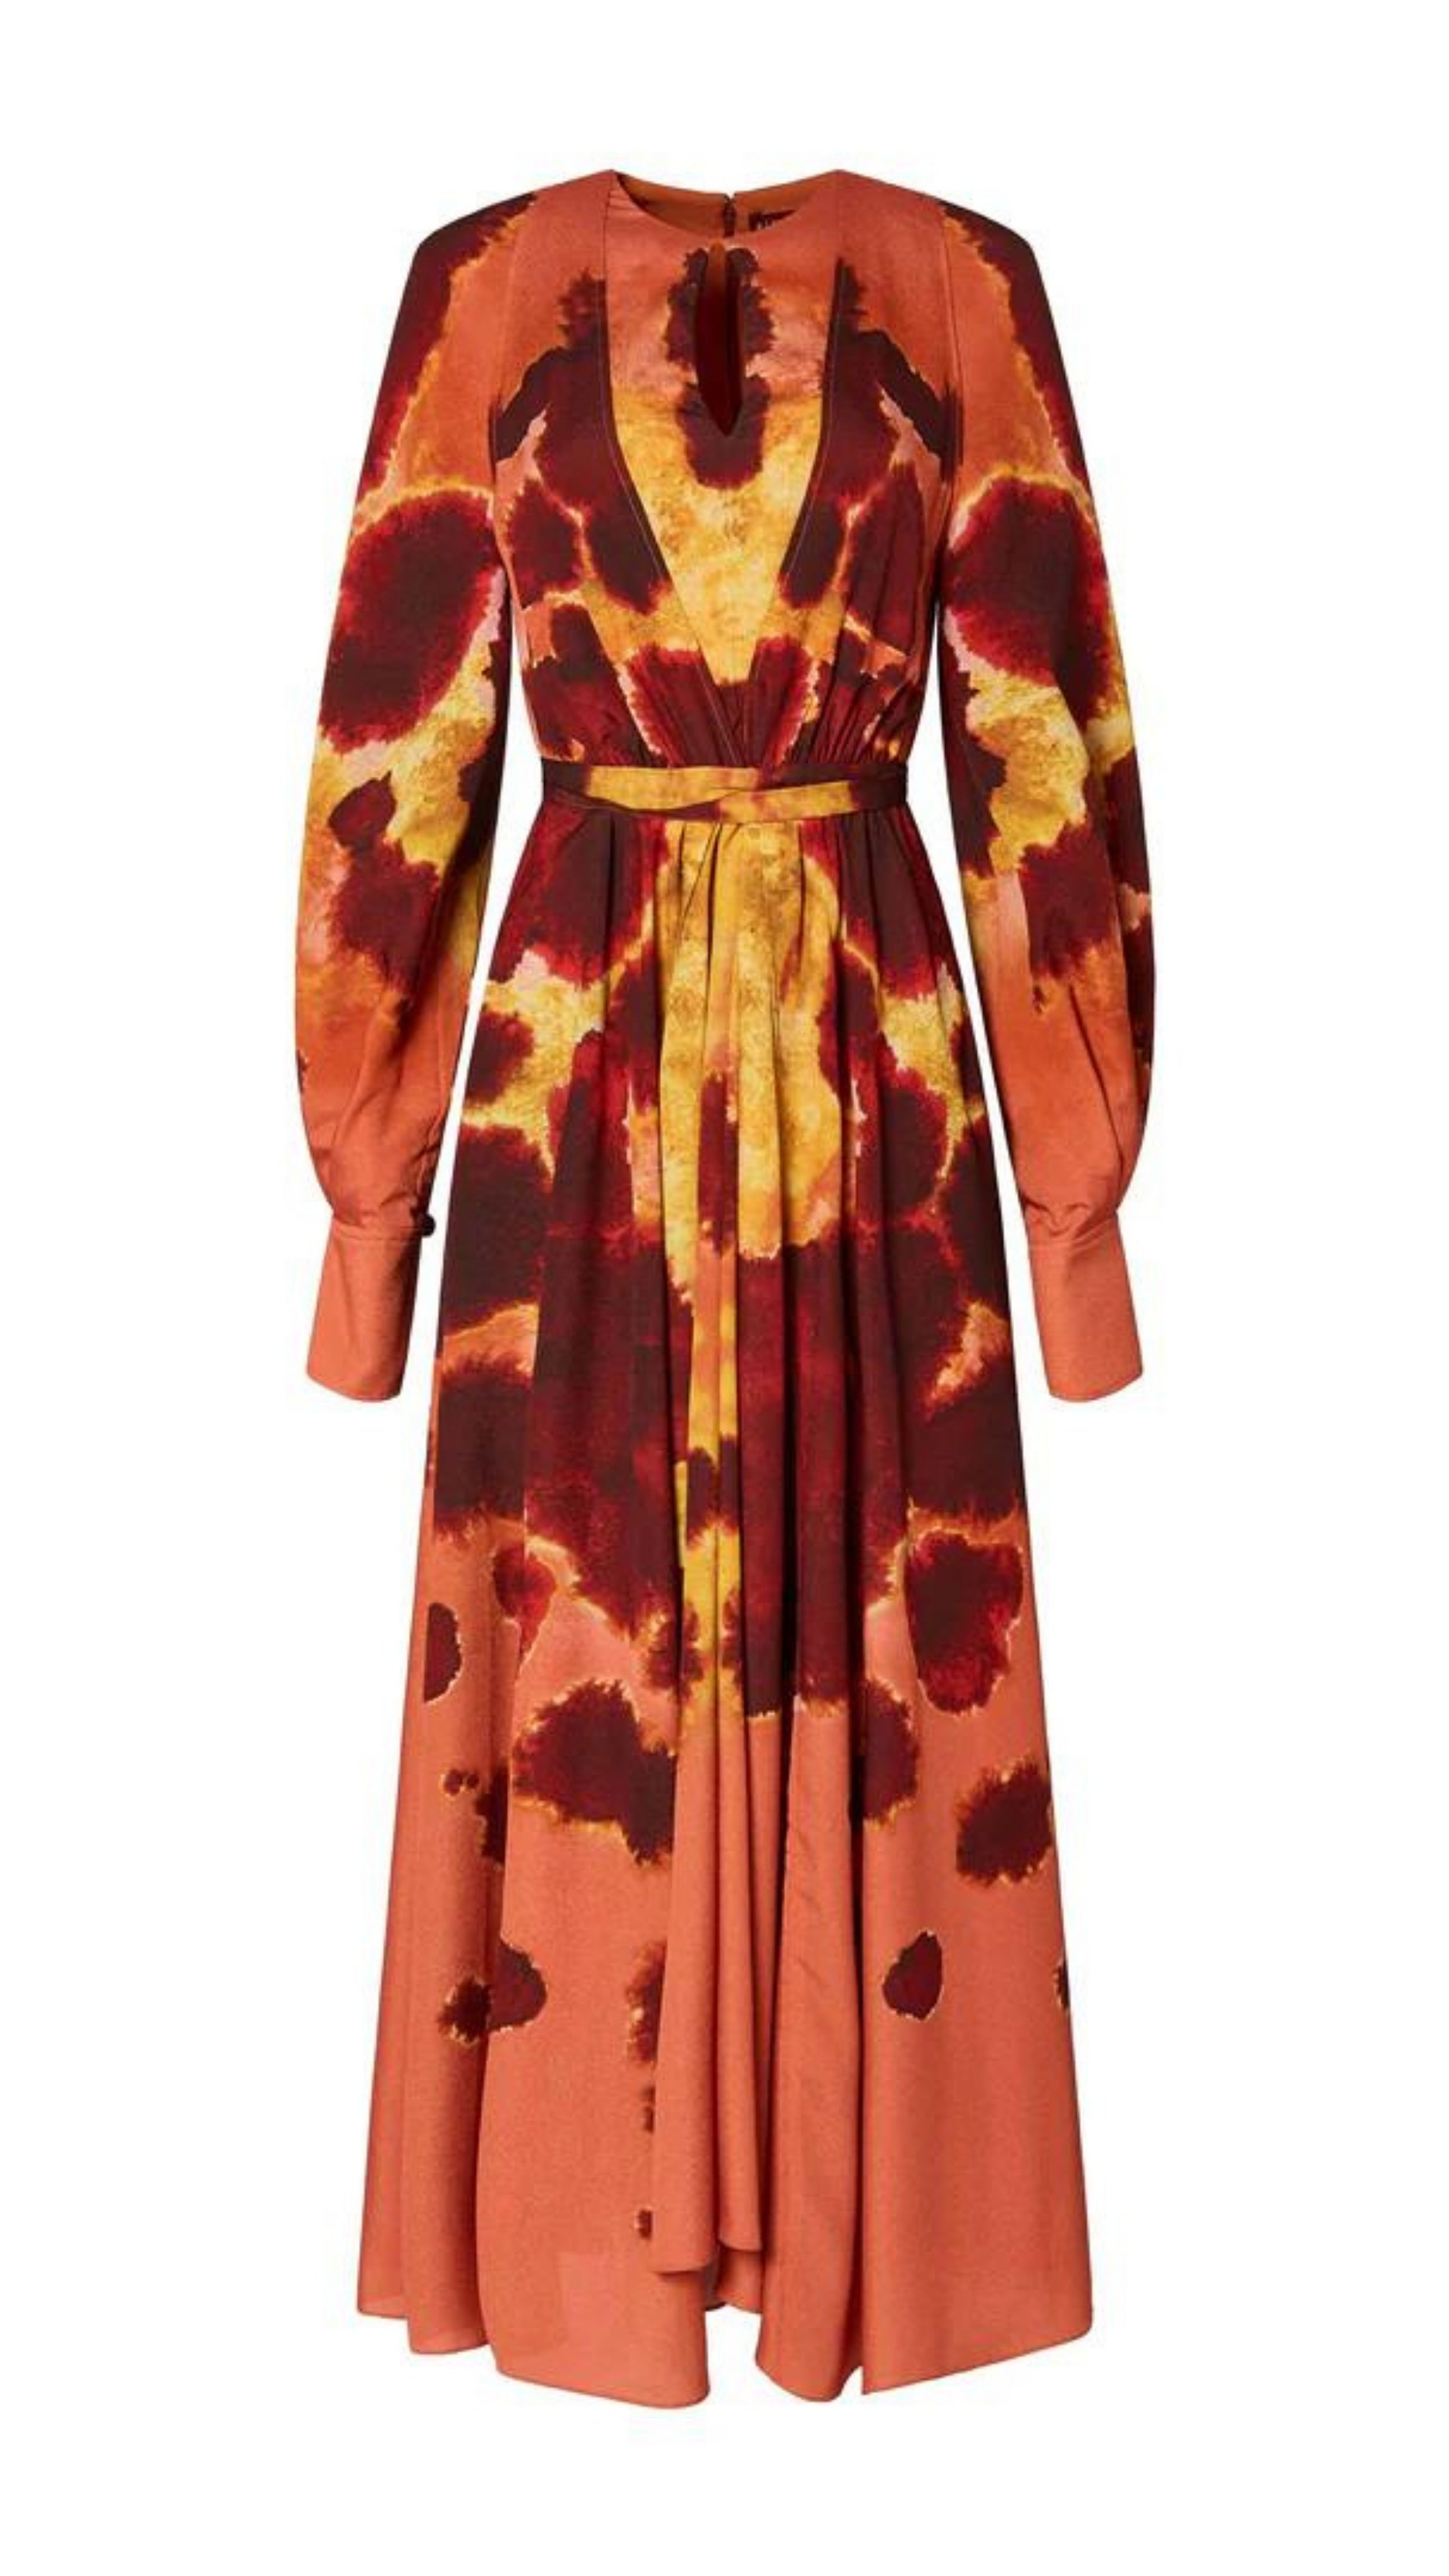 Altuzarra Peirene Dress. The Peirene midi dress has a relaxed silhouette with a tie at the waist. The keyhole neck can be styled closed or open, creating a v-neck look. Made in beautiful peach, cranberry, and yellow dyed pattern. Flat product photo facing front